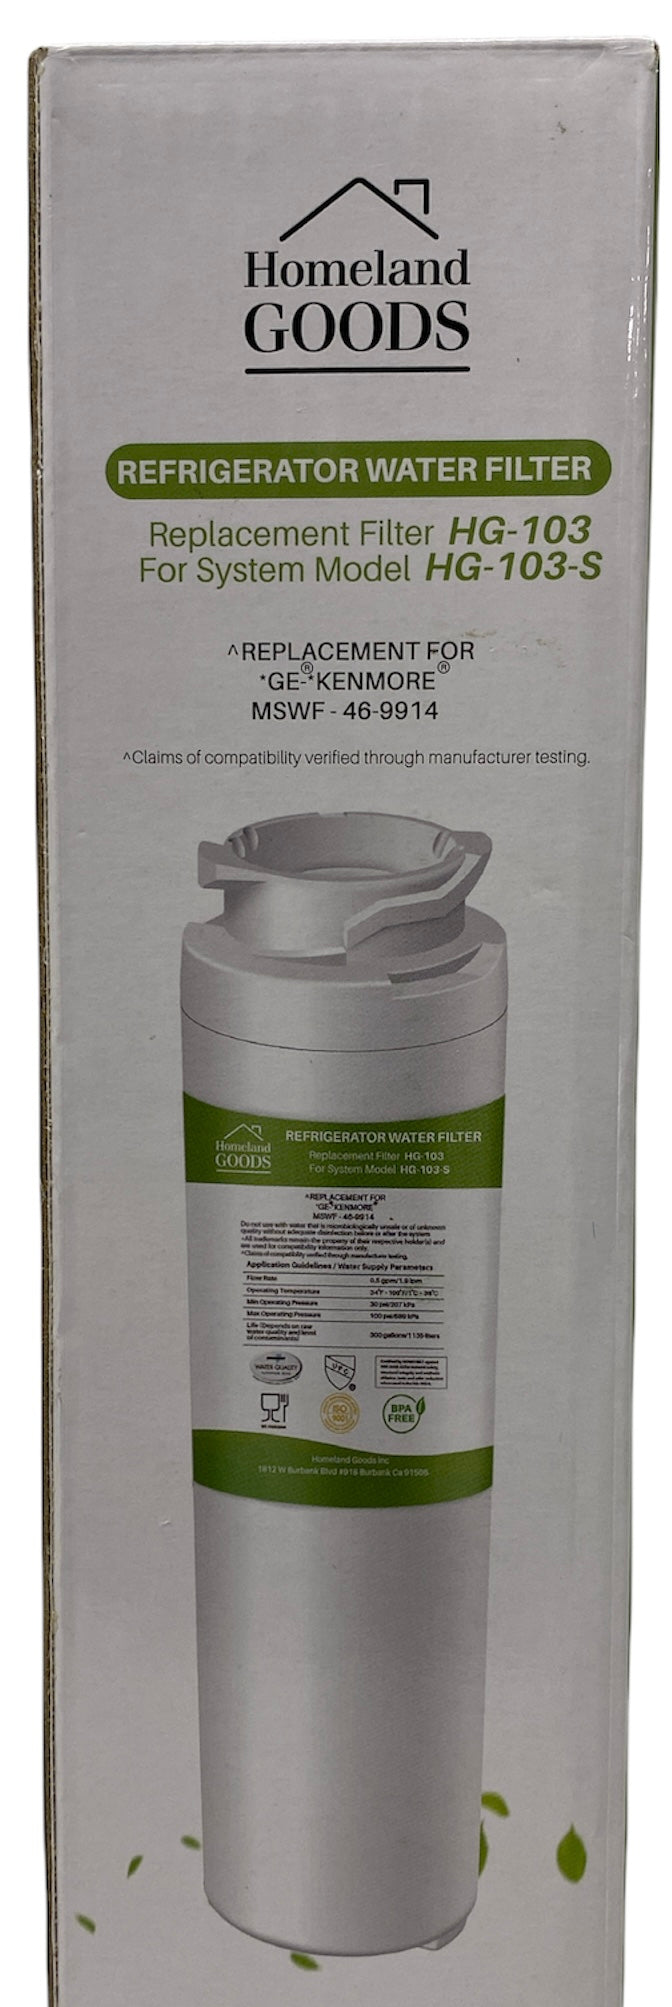 RWF1500A MSWF Refrigerator Water Filter IAPMO Certified Replacement for GE MSWF, 101820A, 101821B, RWF1500A Refrigerator Water Filter